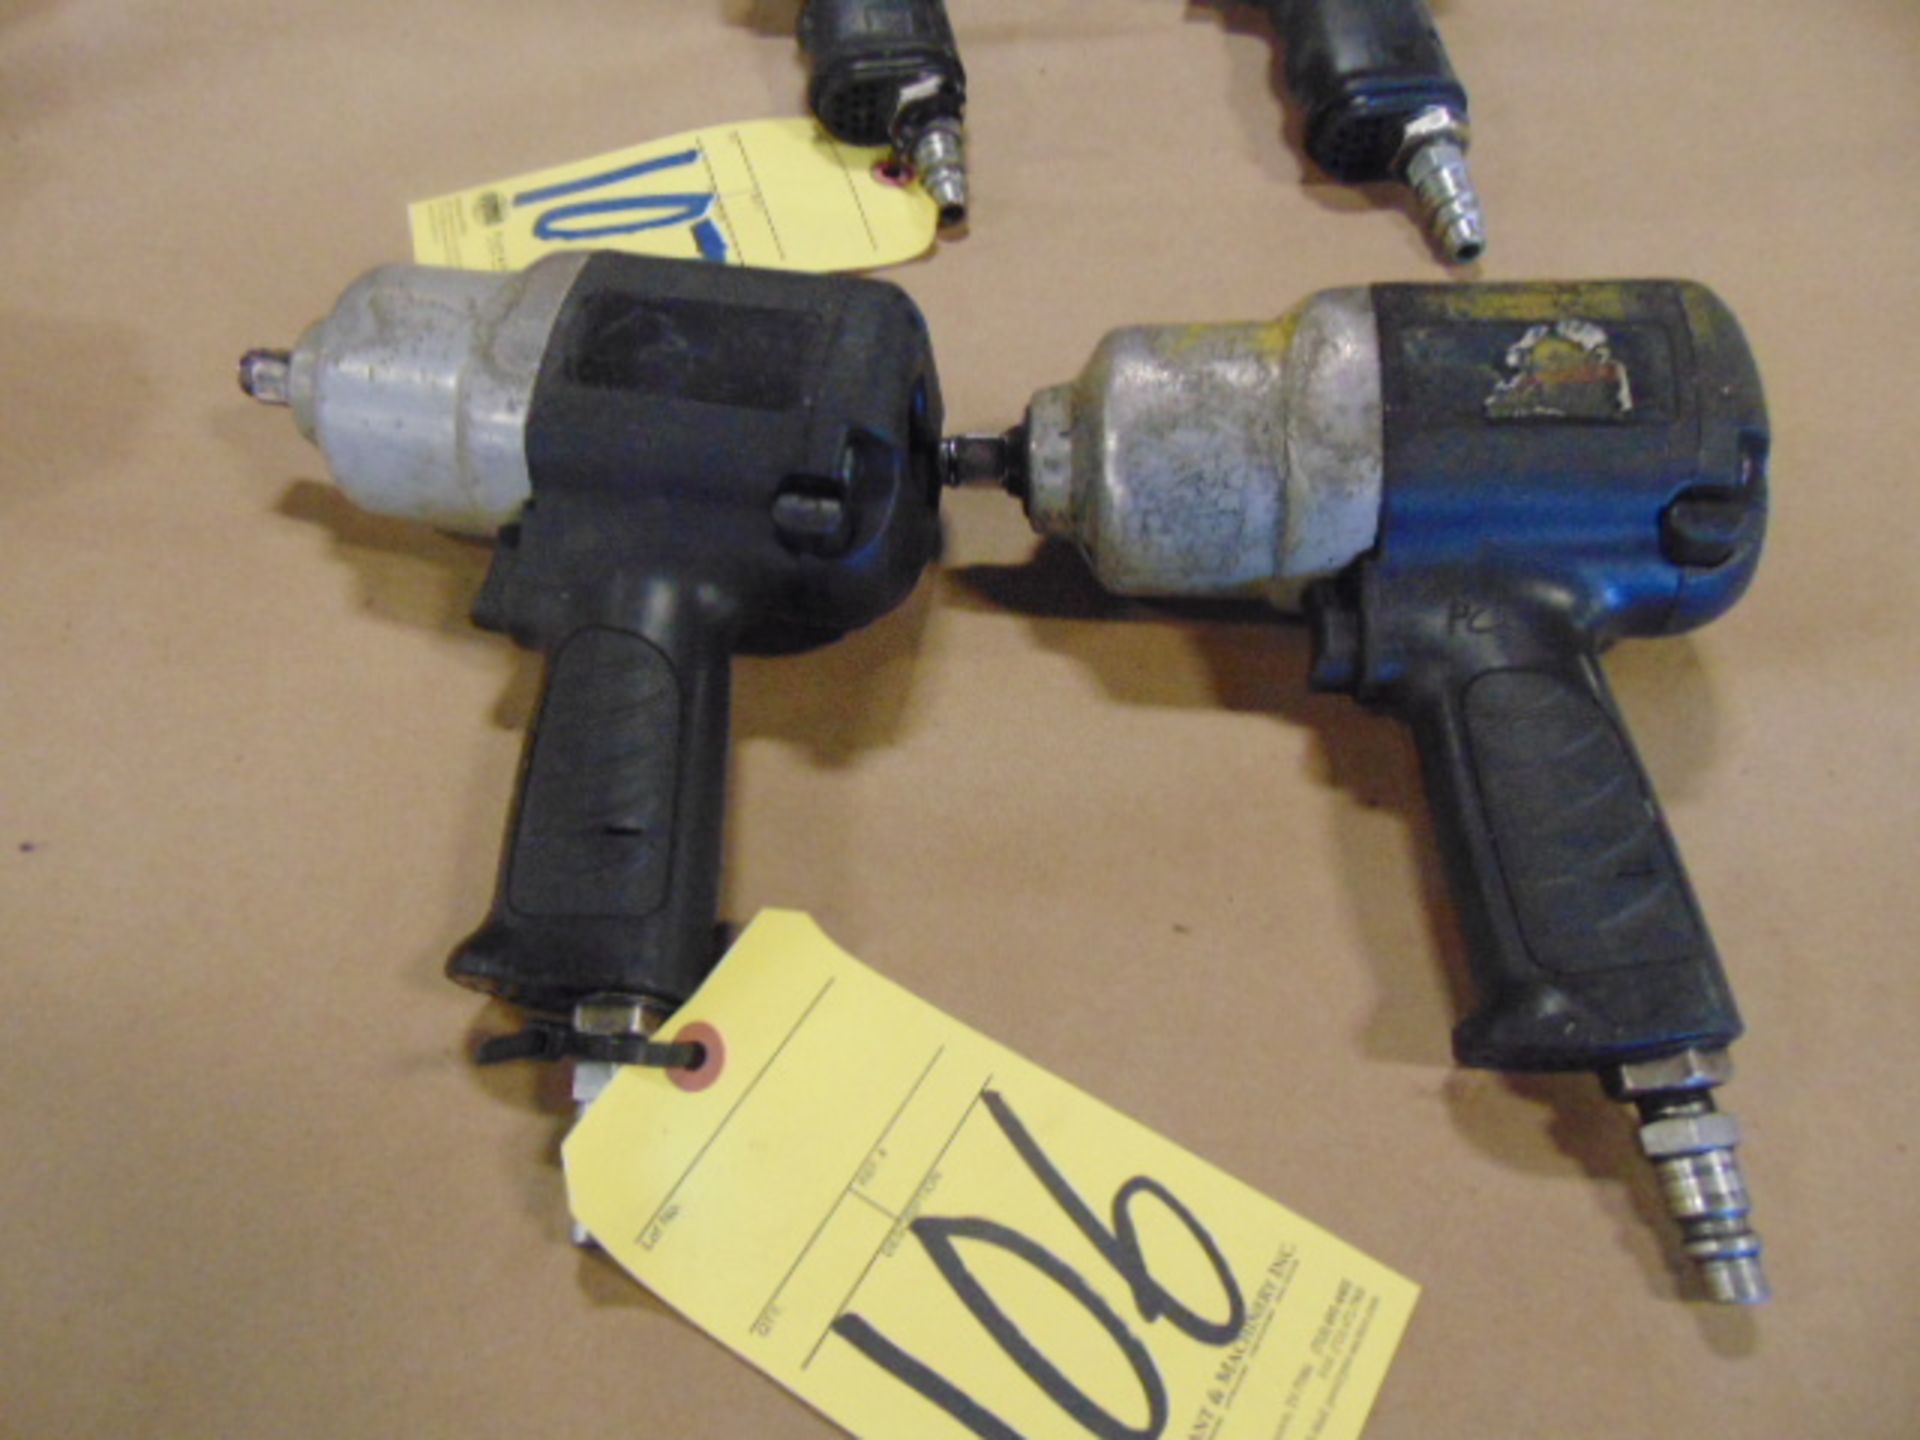 LOT OF PNEUMATIC IMPACT WRENCHES (2)